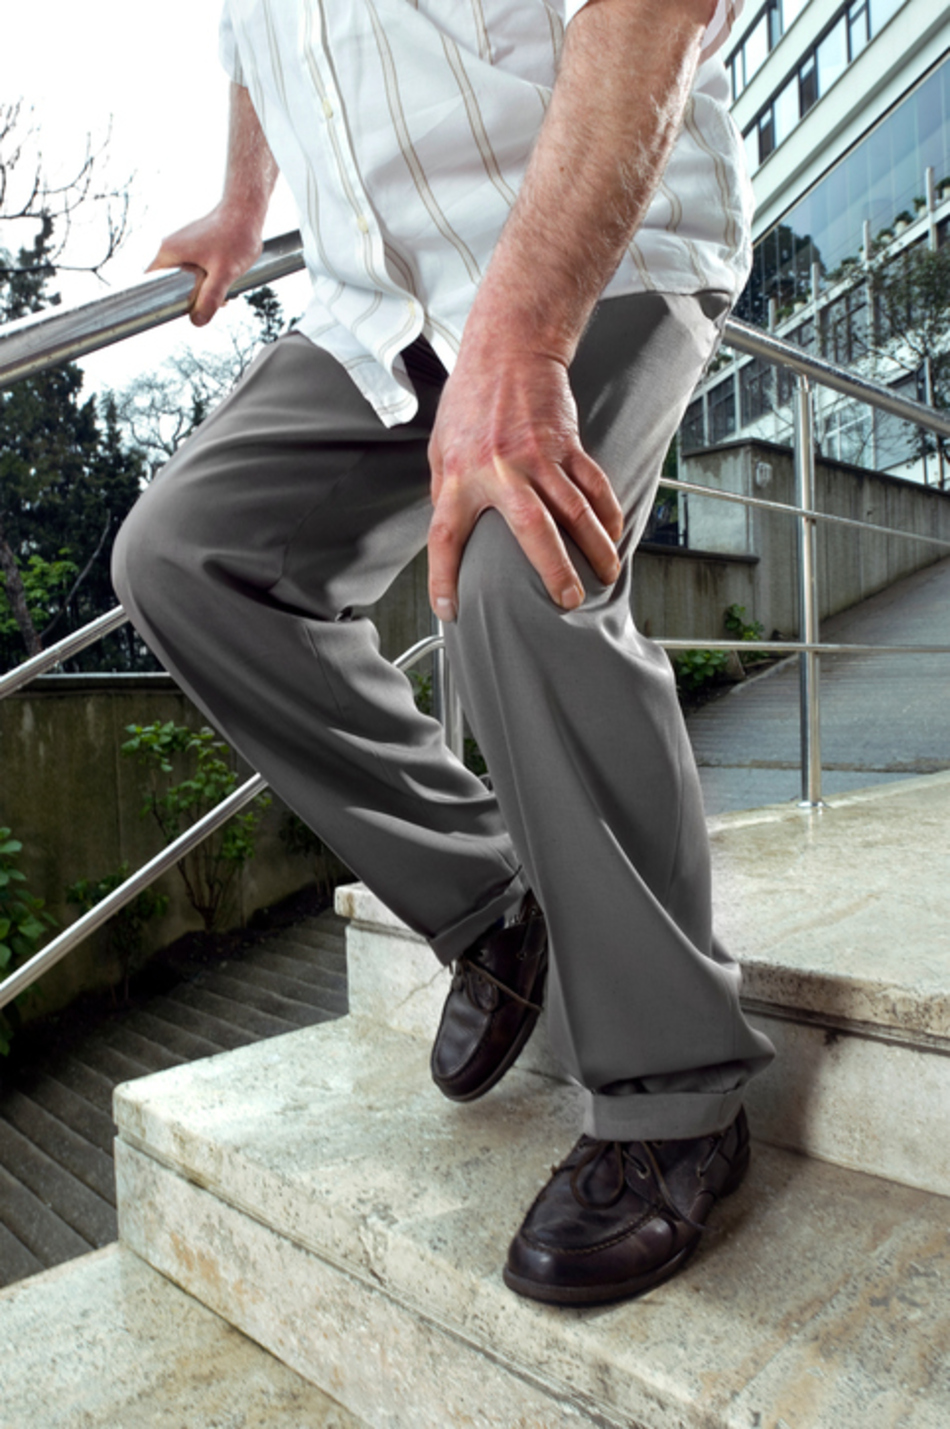 Over 40 and Have Searing Leg Pain When Walking? It Might Be Spinal Stenosis